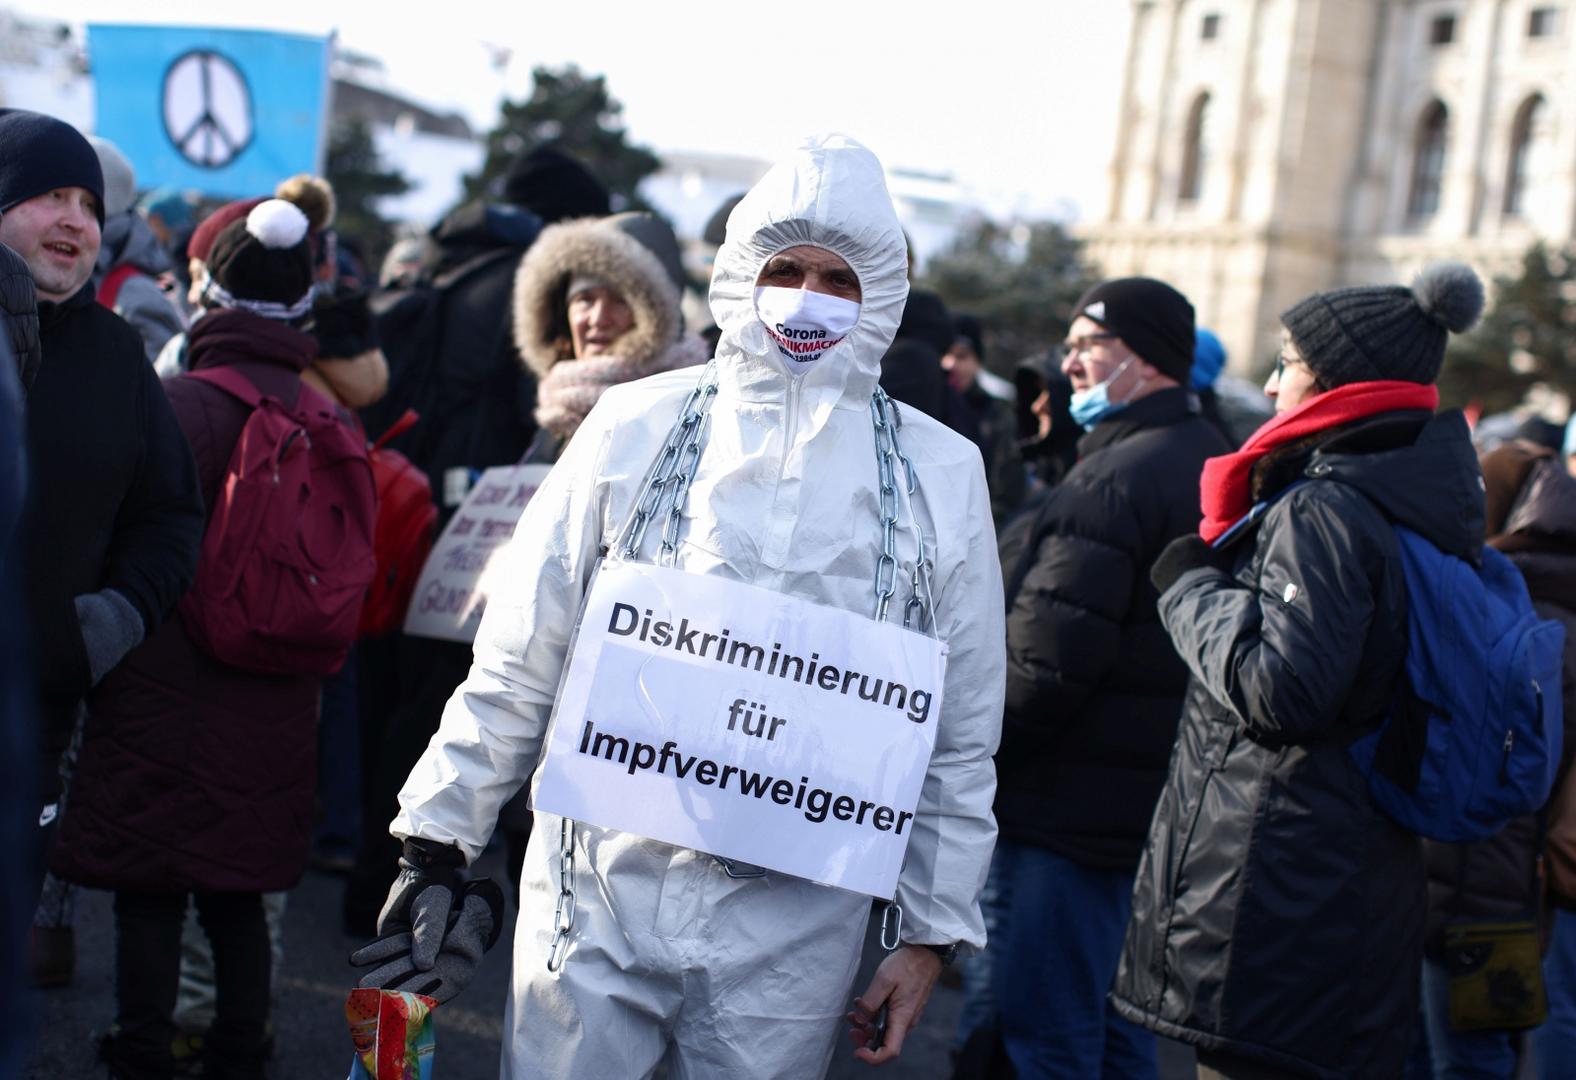 Demonstration against the COVID-19 measures and their economic consequences, in Vienna A protestor wears a sign reading "discrimination for vaccination refusers" during a demonstration against the coronavirus disease (COVID-19) measures and their economic consequences in Vienna, Austria, January 16, 2021. REUTERS/Lisi Niesner LISI NIESNER